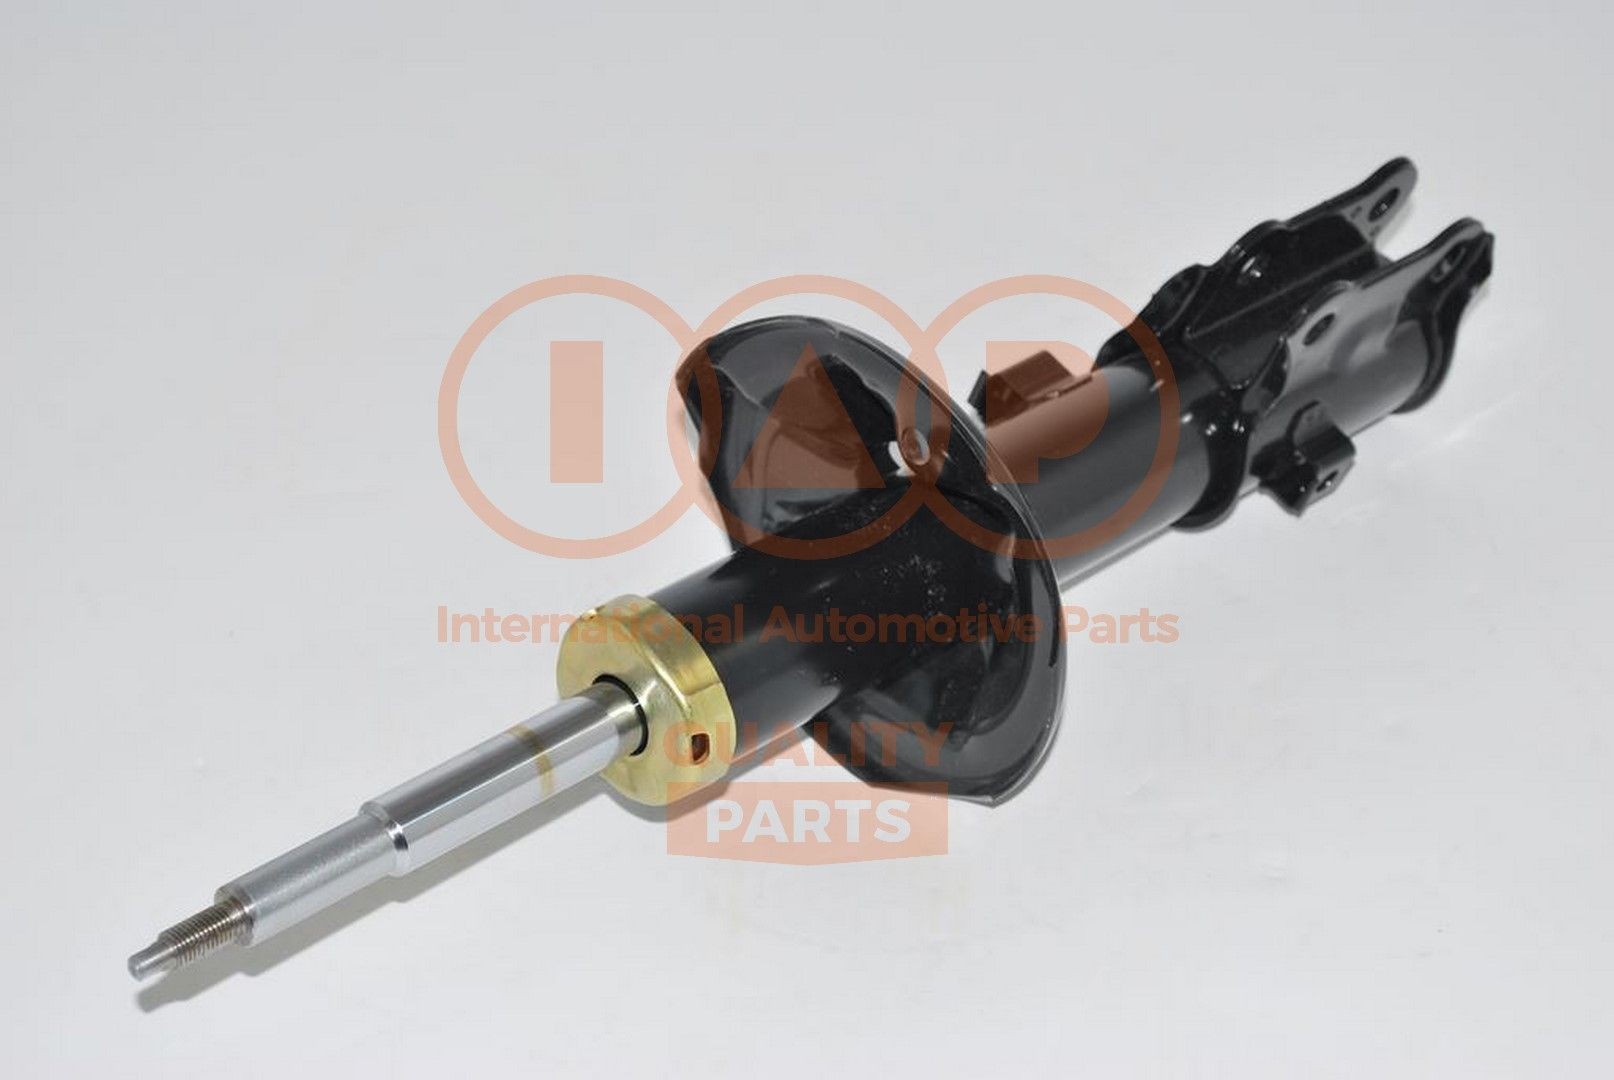 IAP QUALITY PARTS 504-07093 Shock absorber 54650-02310